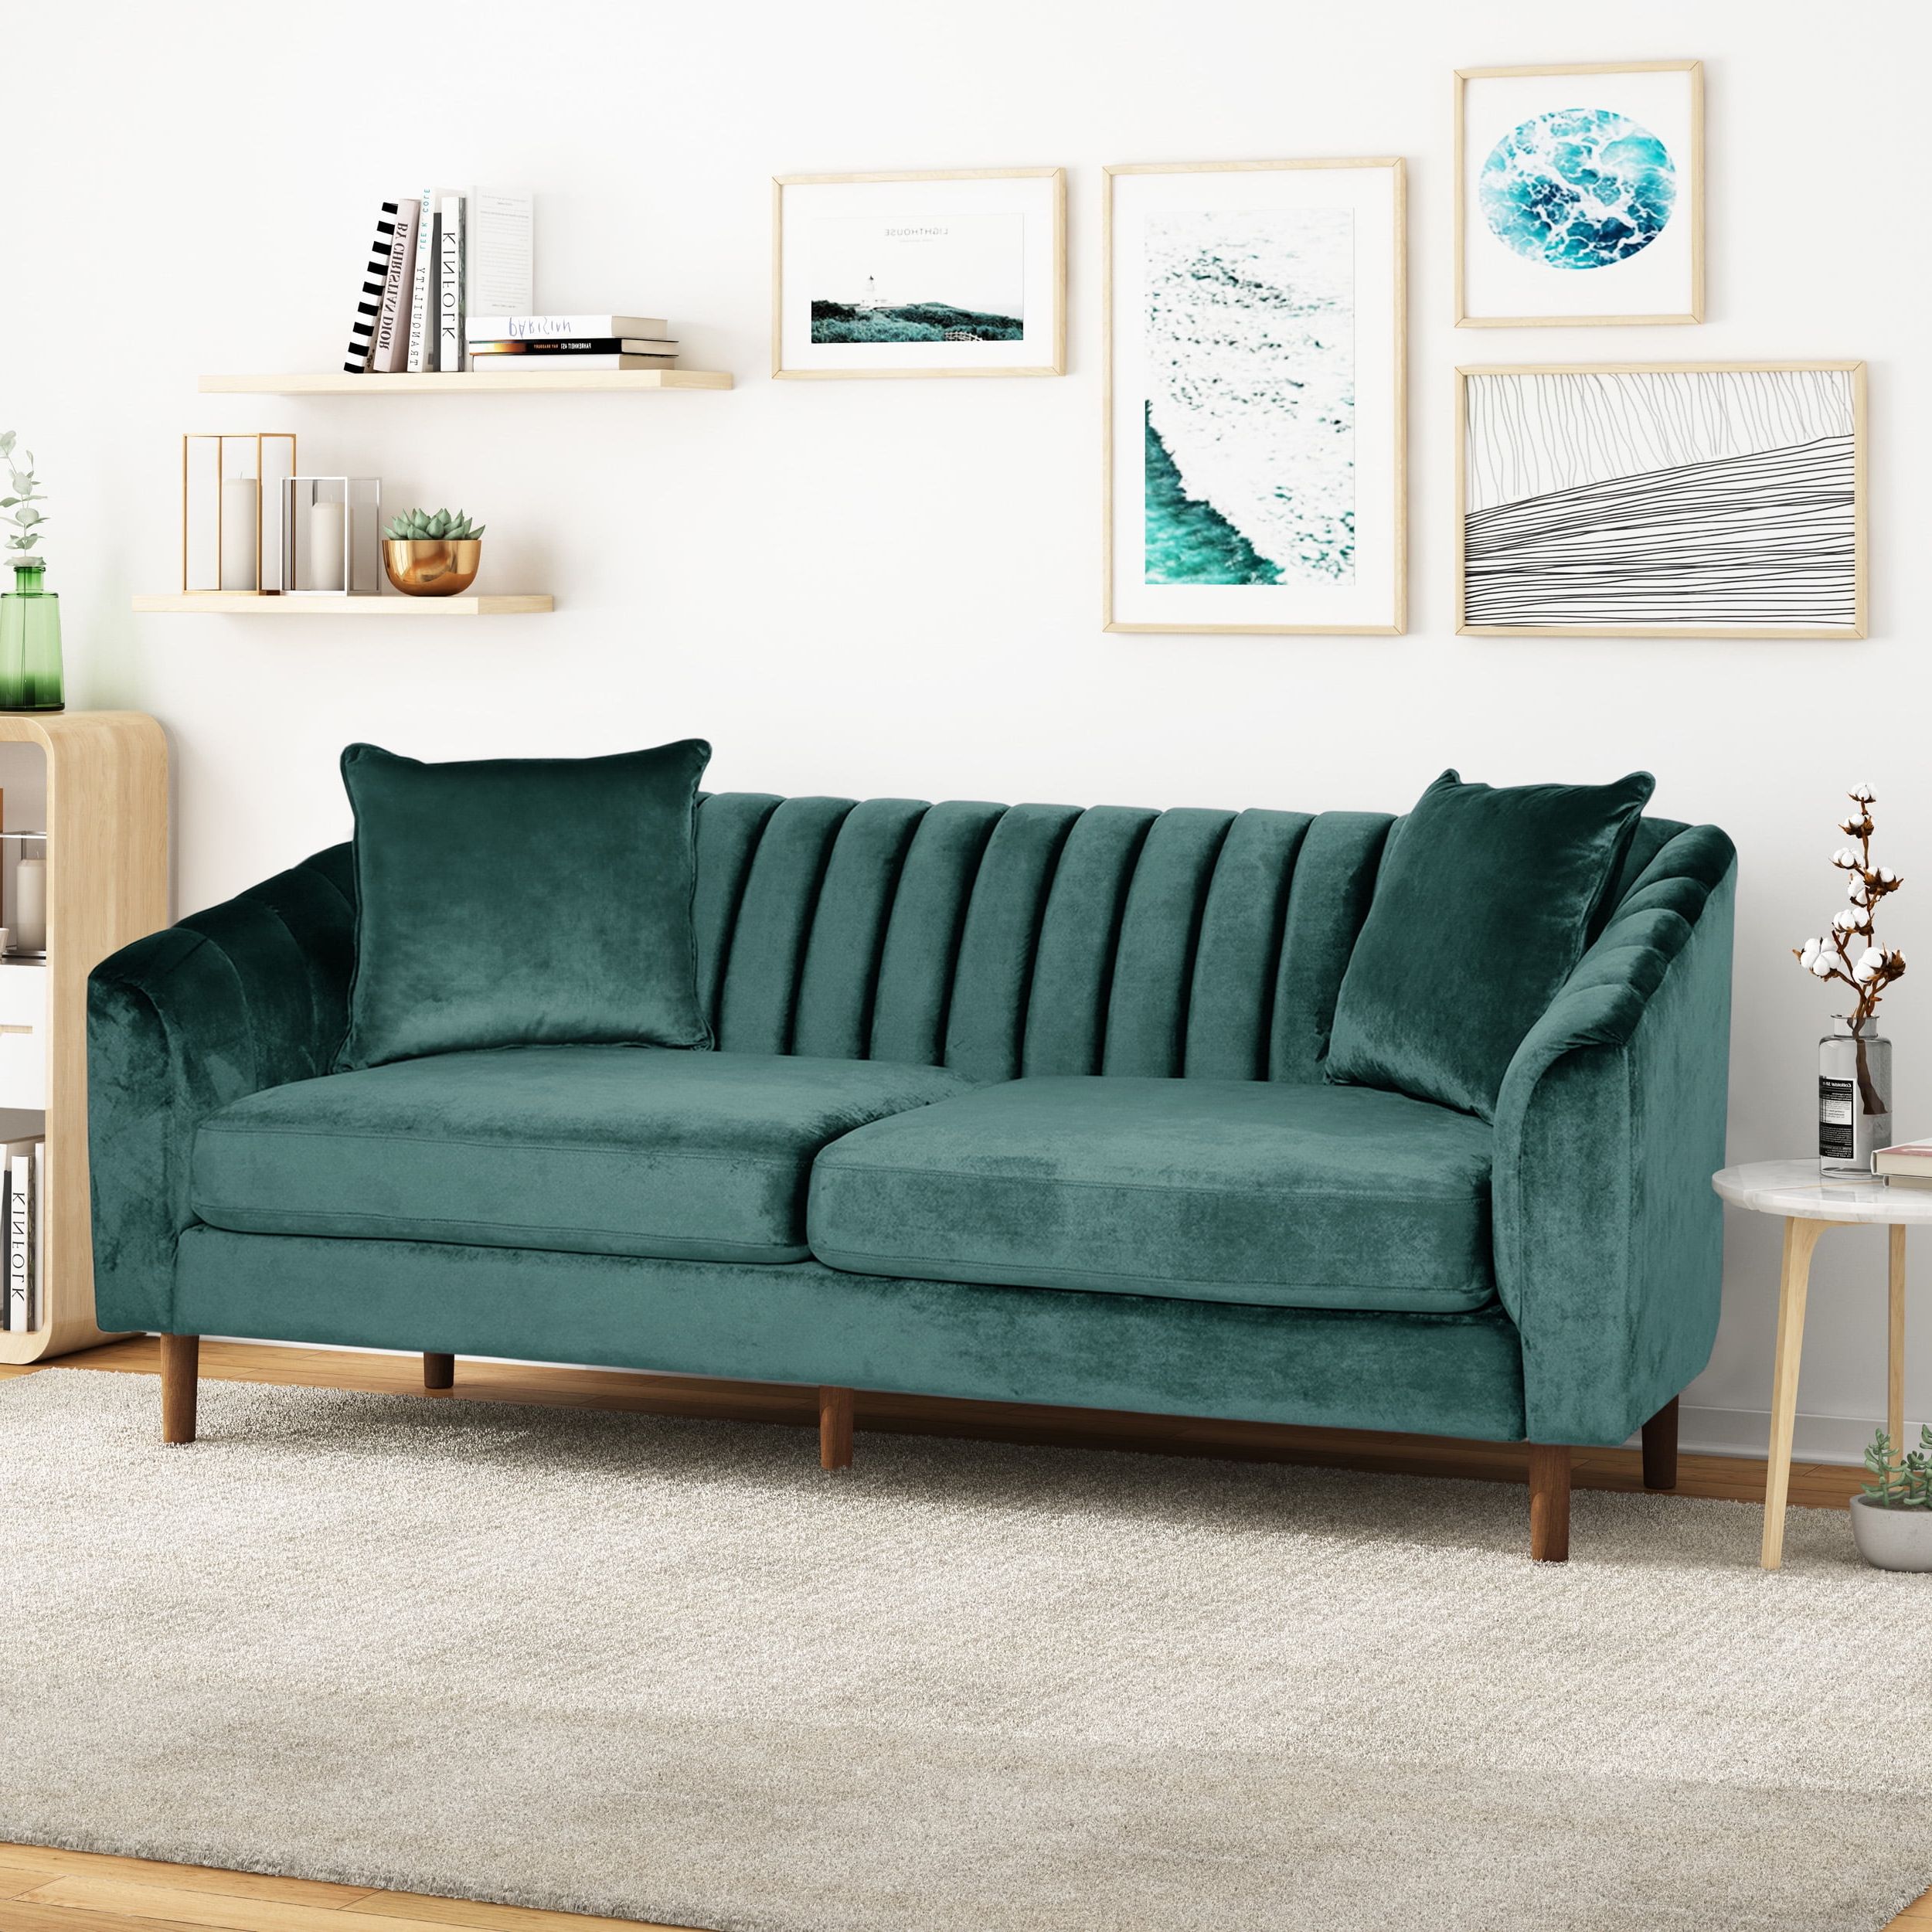 Noble House Orly Contemporary 3 Seater Velvet Sofa, Teal – Walmart Pertaining To Modern Velvet Sofa Recliners With Storage (View 7 of 20)